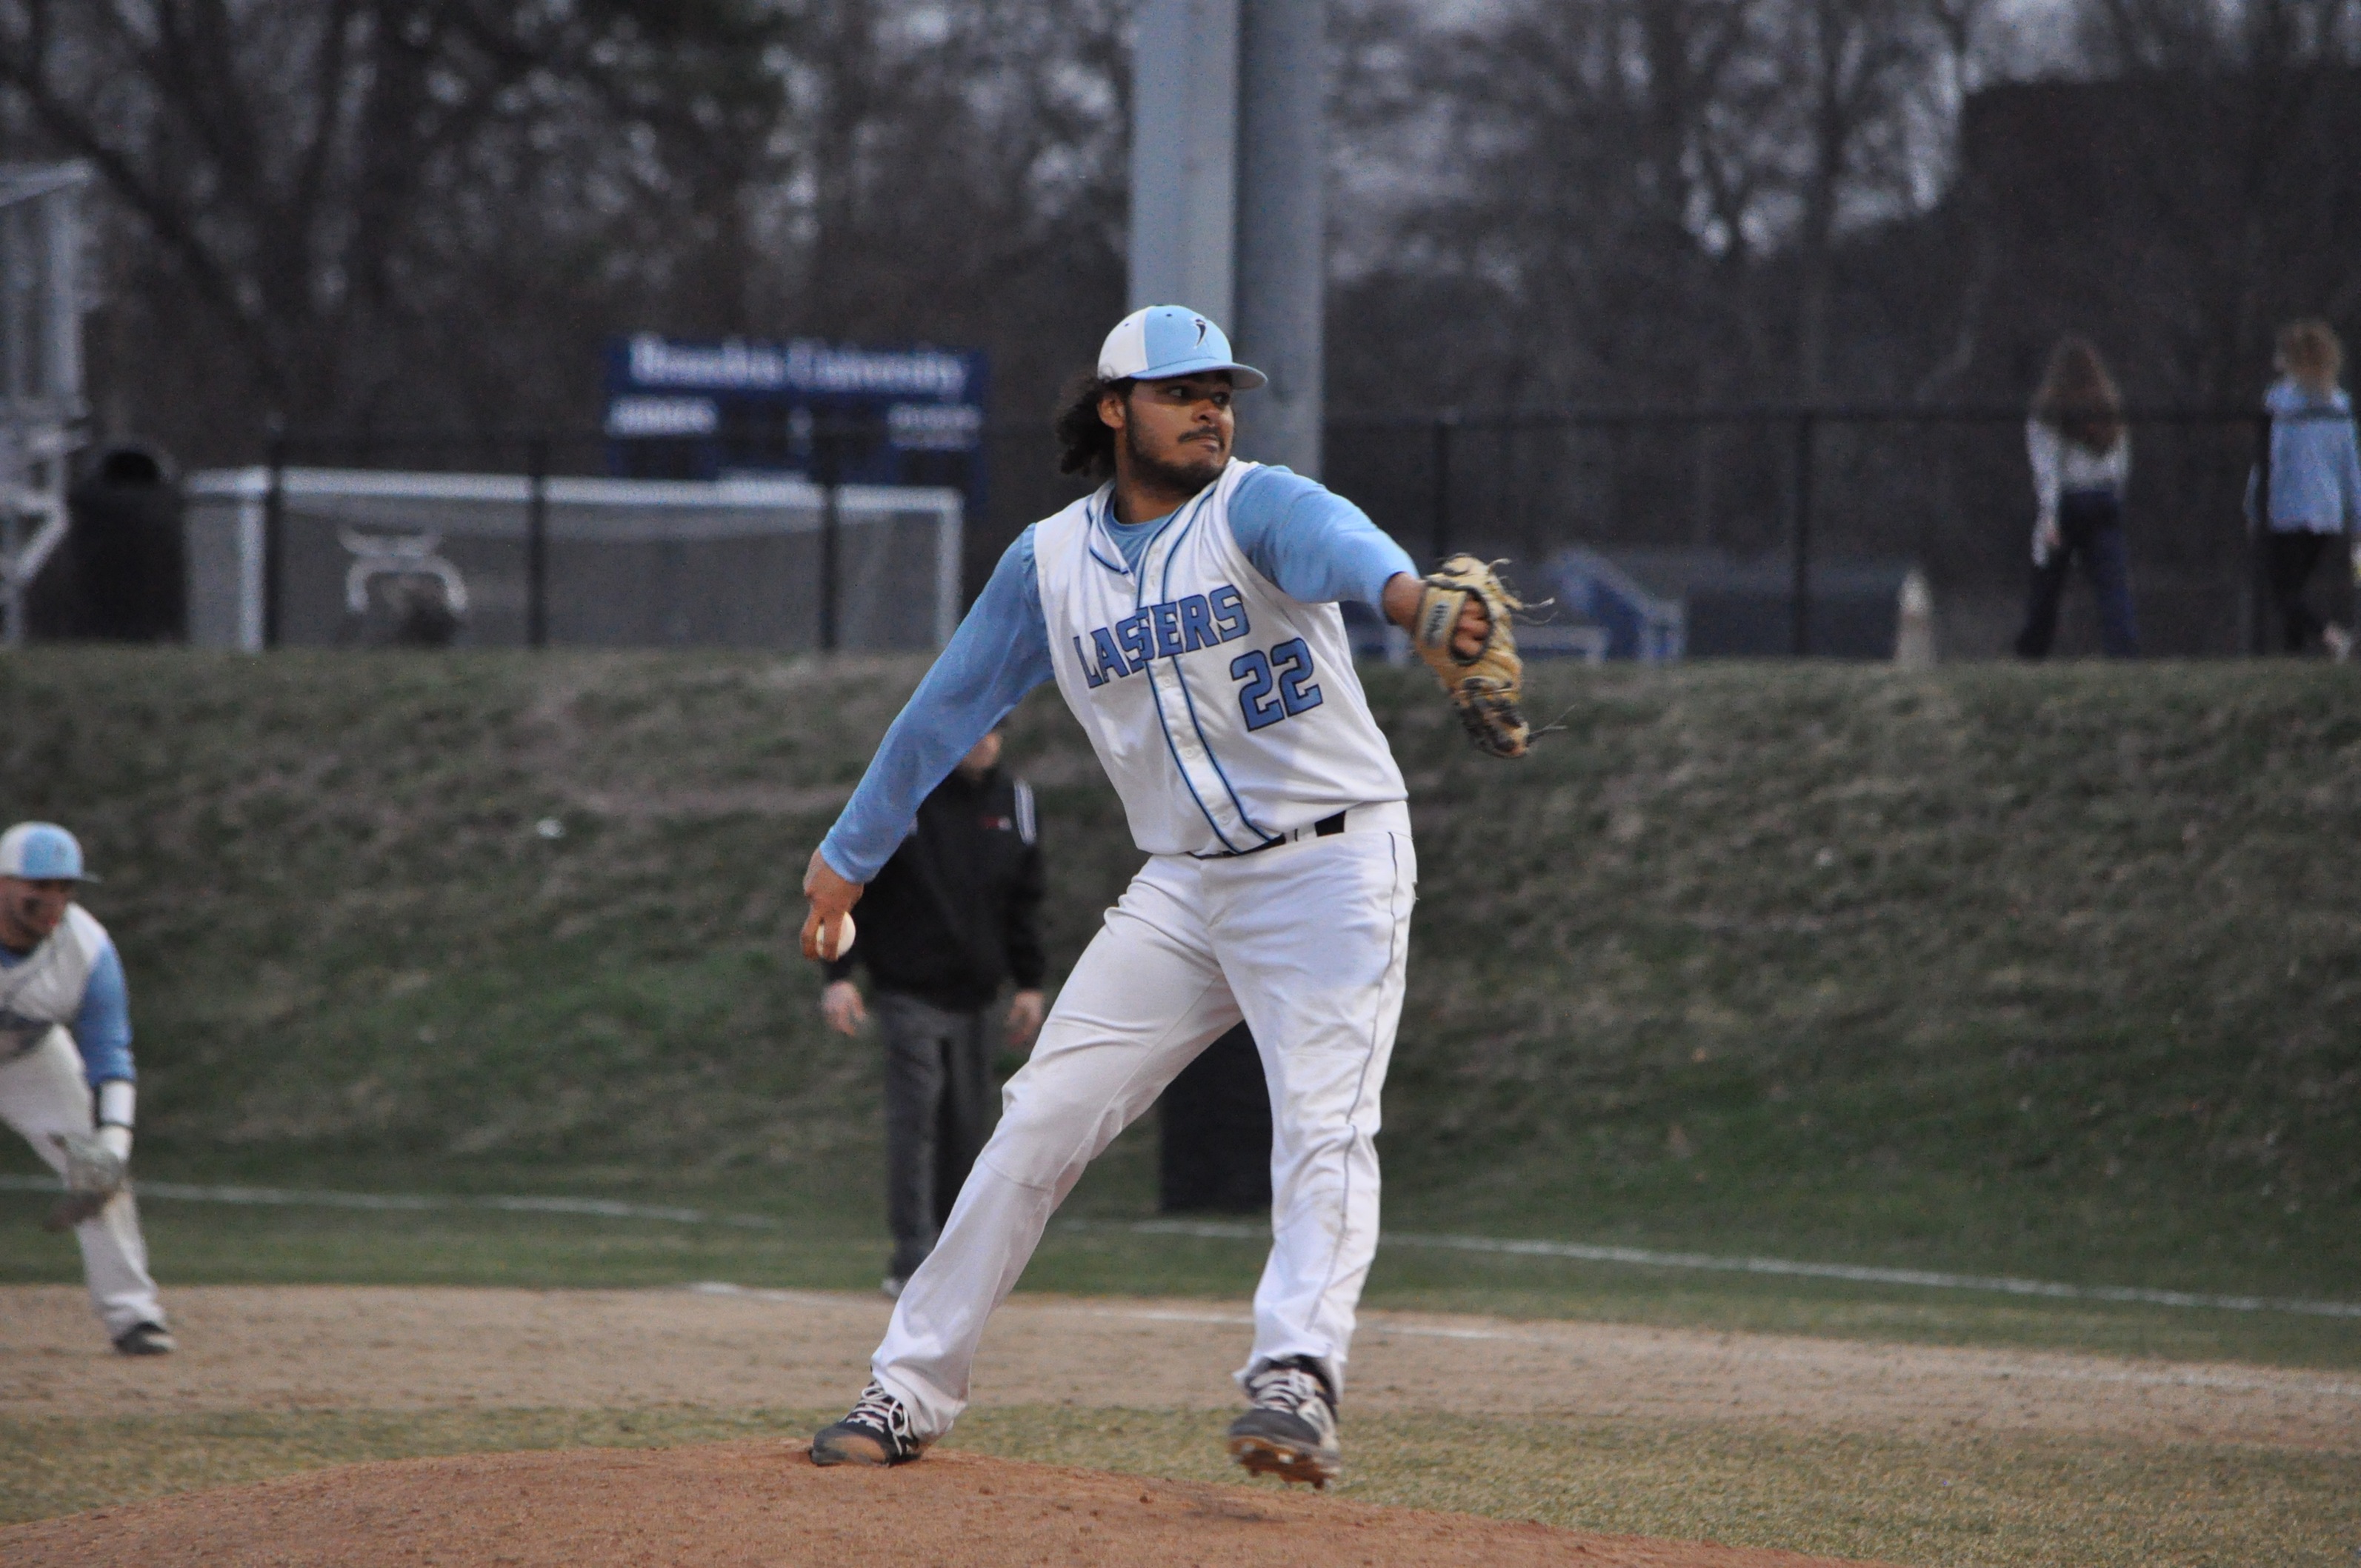 BSB: Lasers split doubleheader with Suffolk